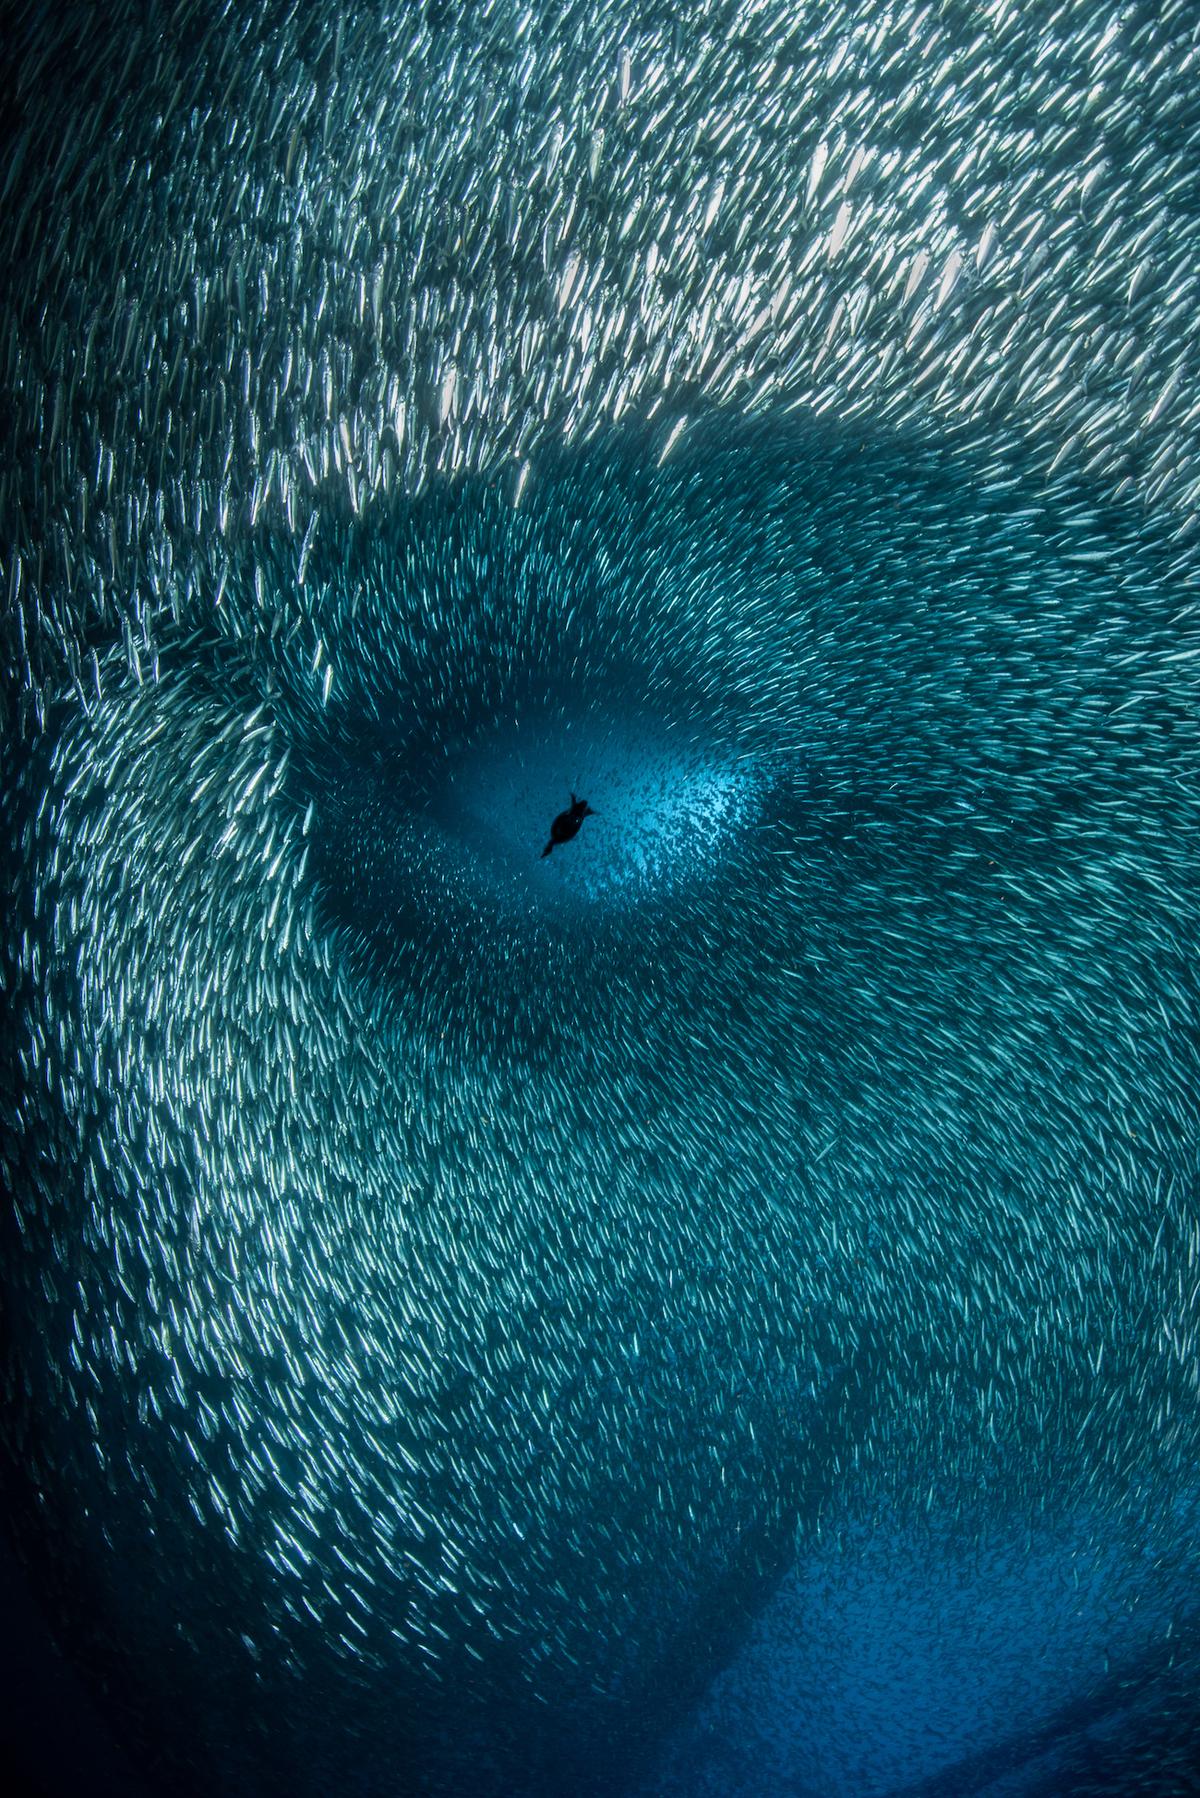 A cormorant dives through a huge school of baitfish, creating a series of shapes that mimics that of a human face. (Courtesy of Brook Peterson)